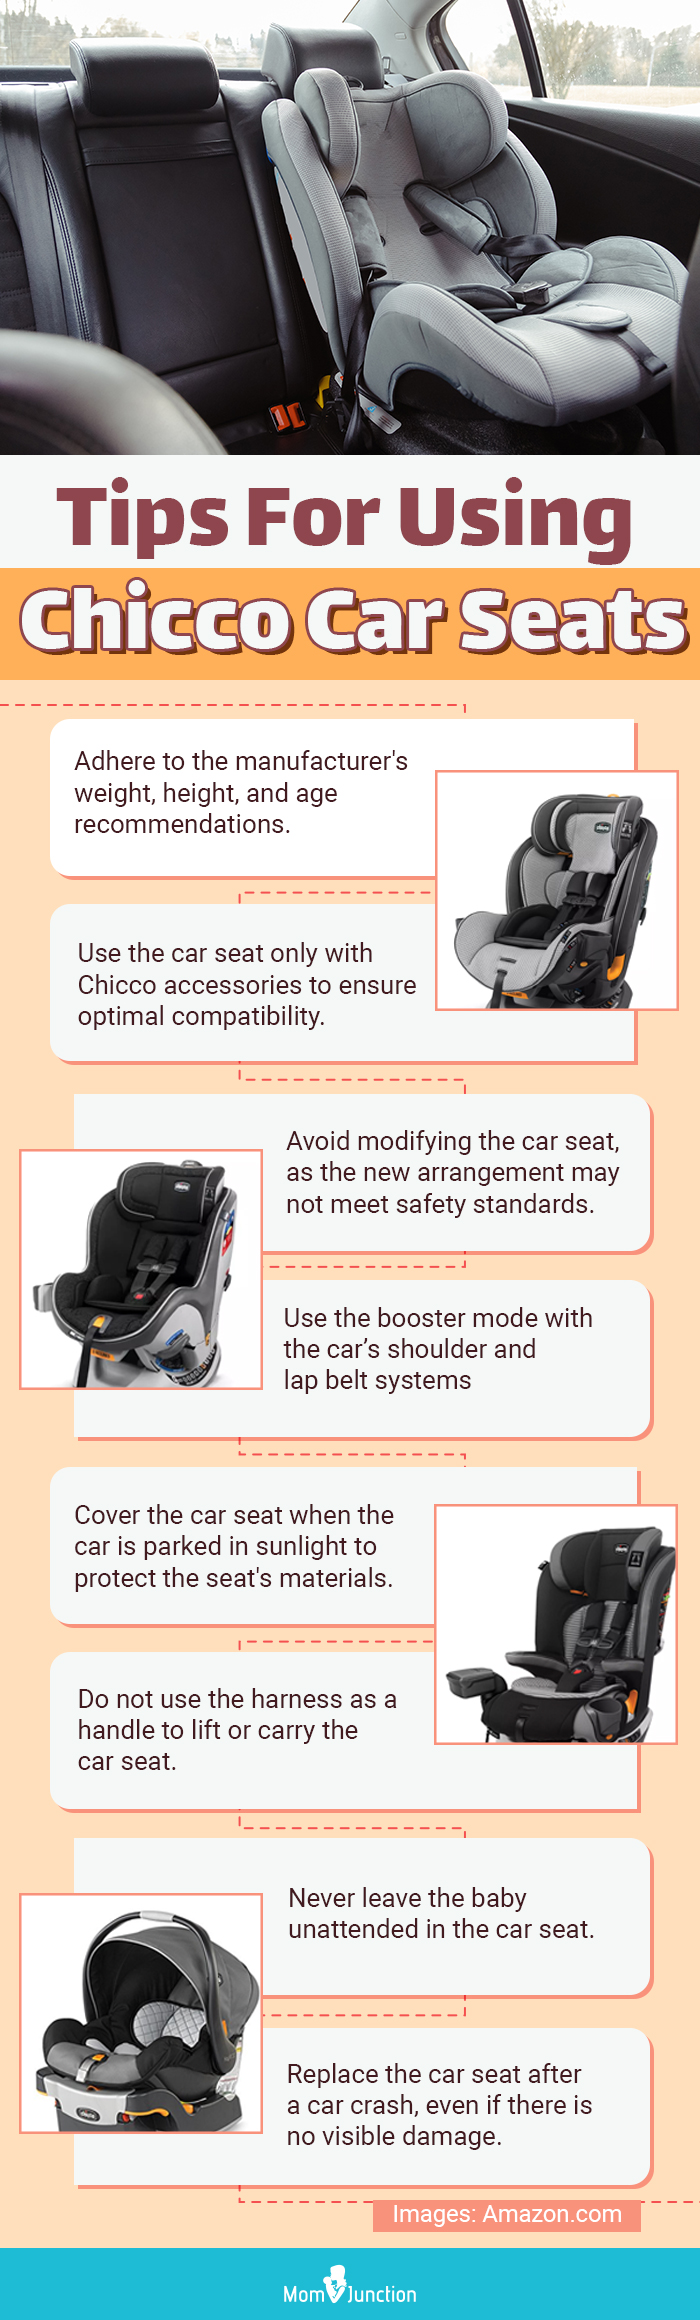 Tips For Using Chicco Car Seats (infographic)